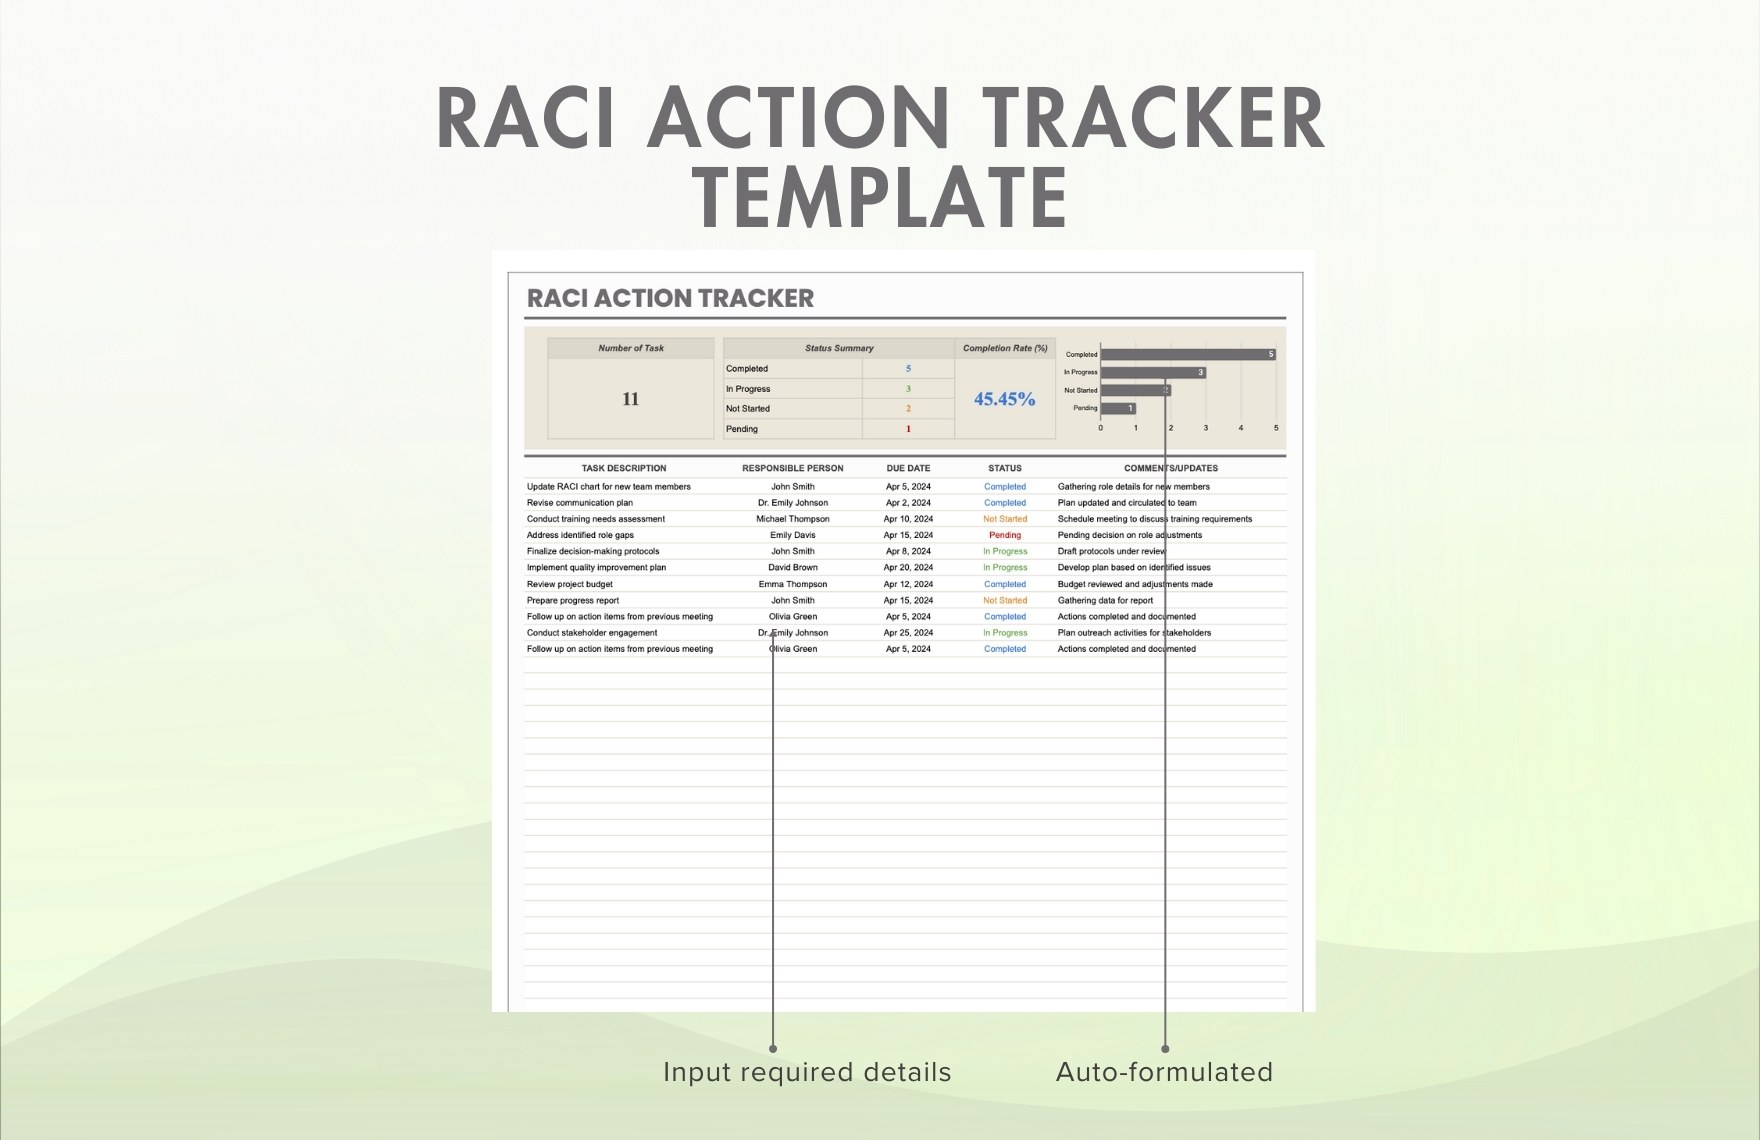 RACI Action Tracker Template